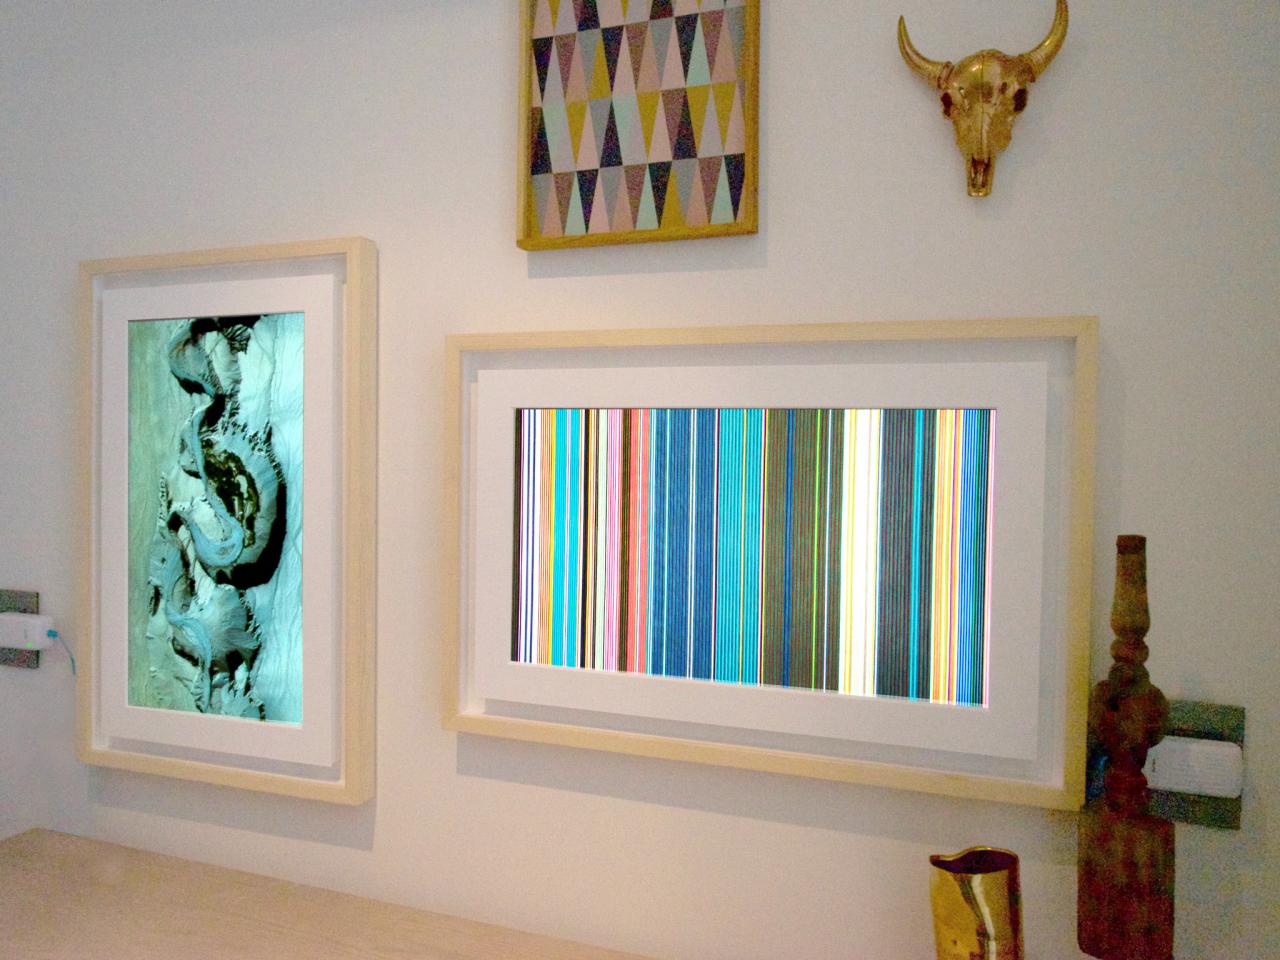 Digital Picture Frames Have Grown Up Into Wall Art HGTV